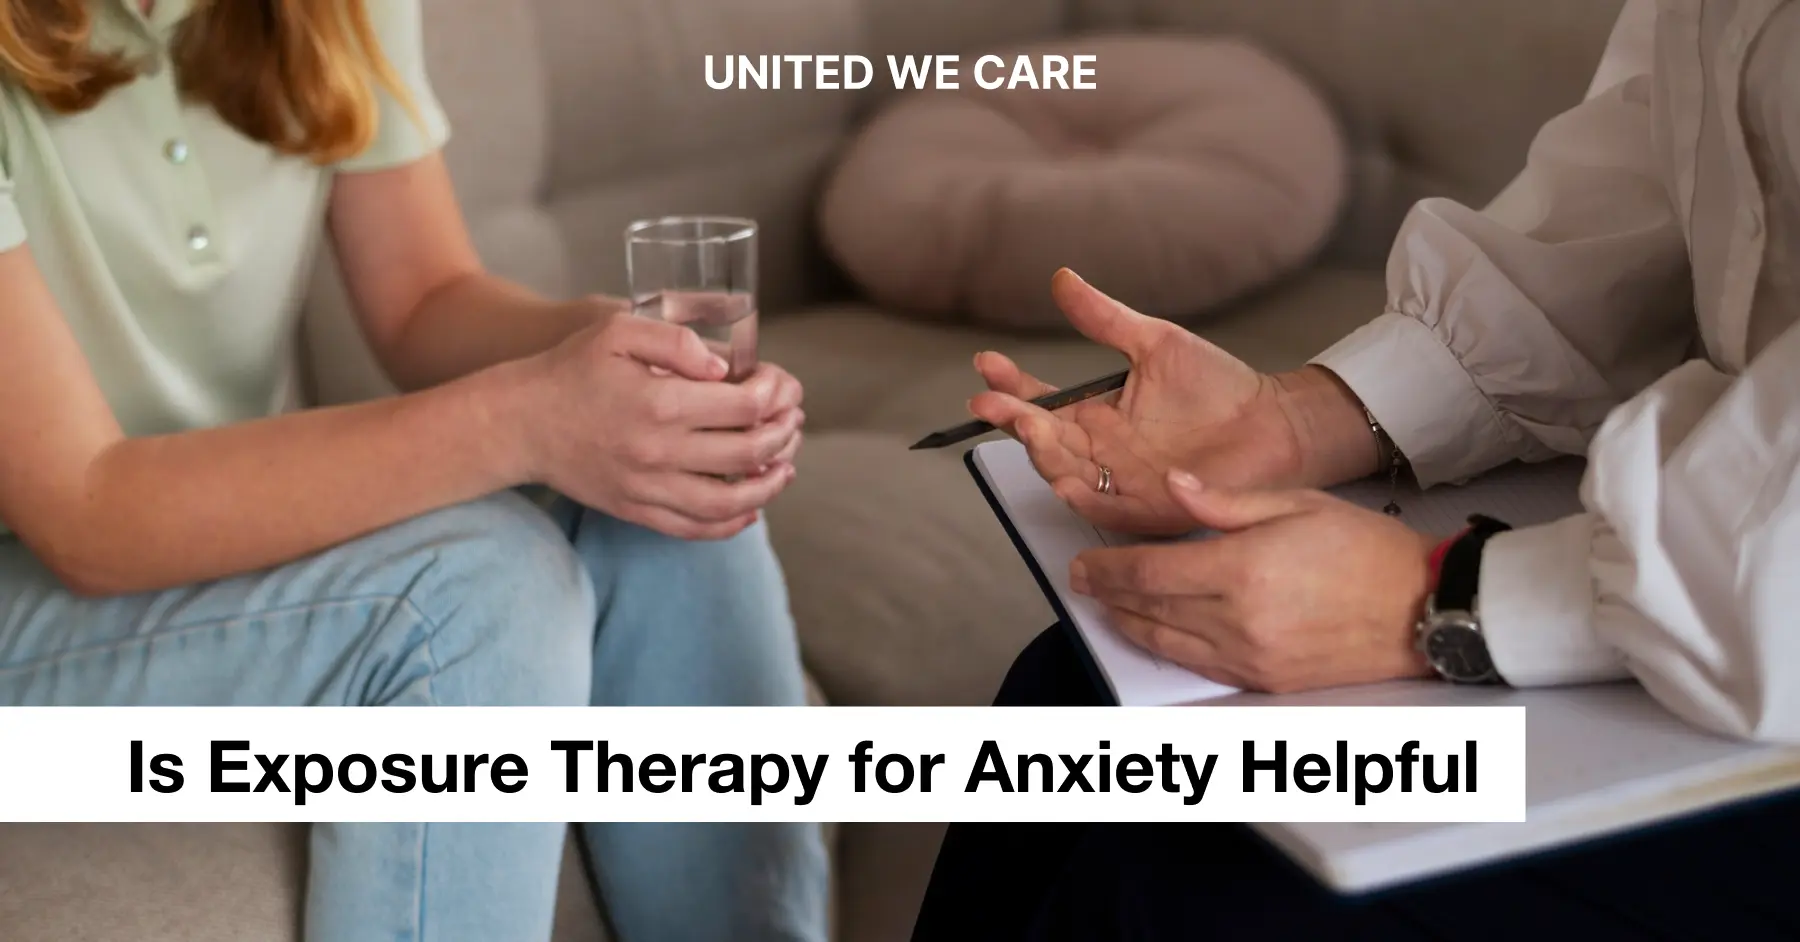 Is Exposure Therapy for Anxiety Helpful?